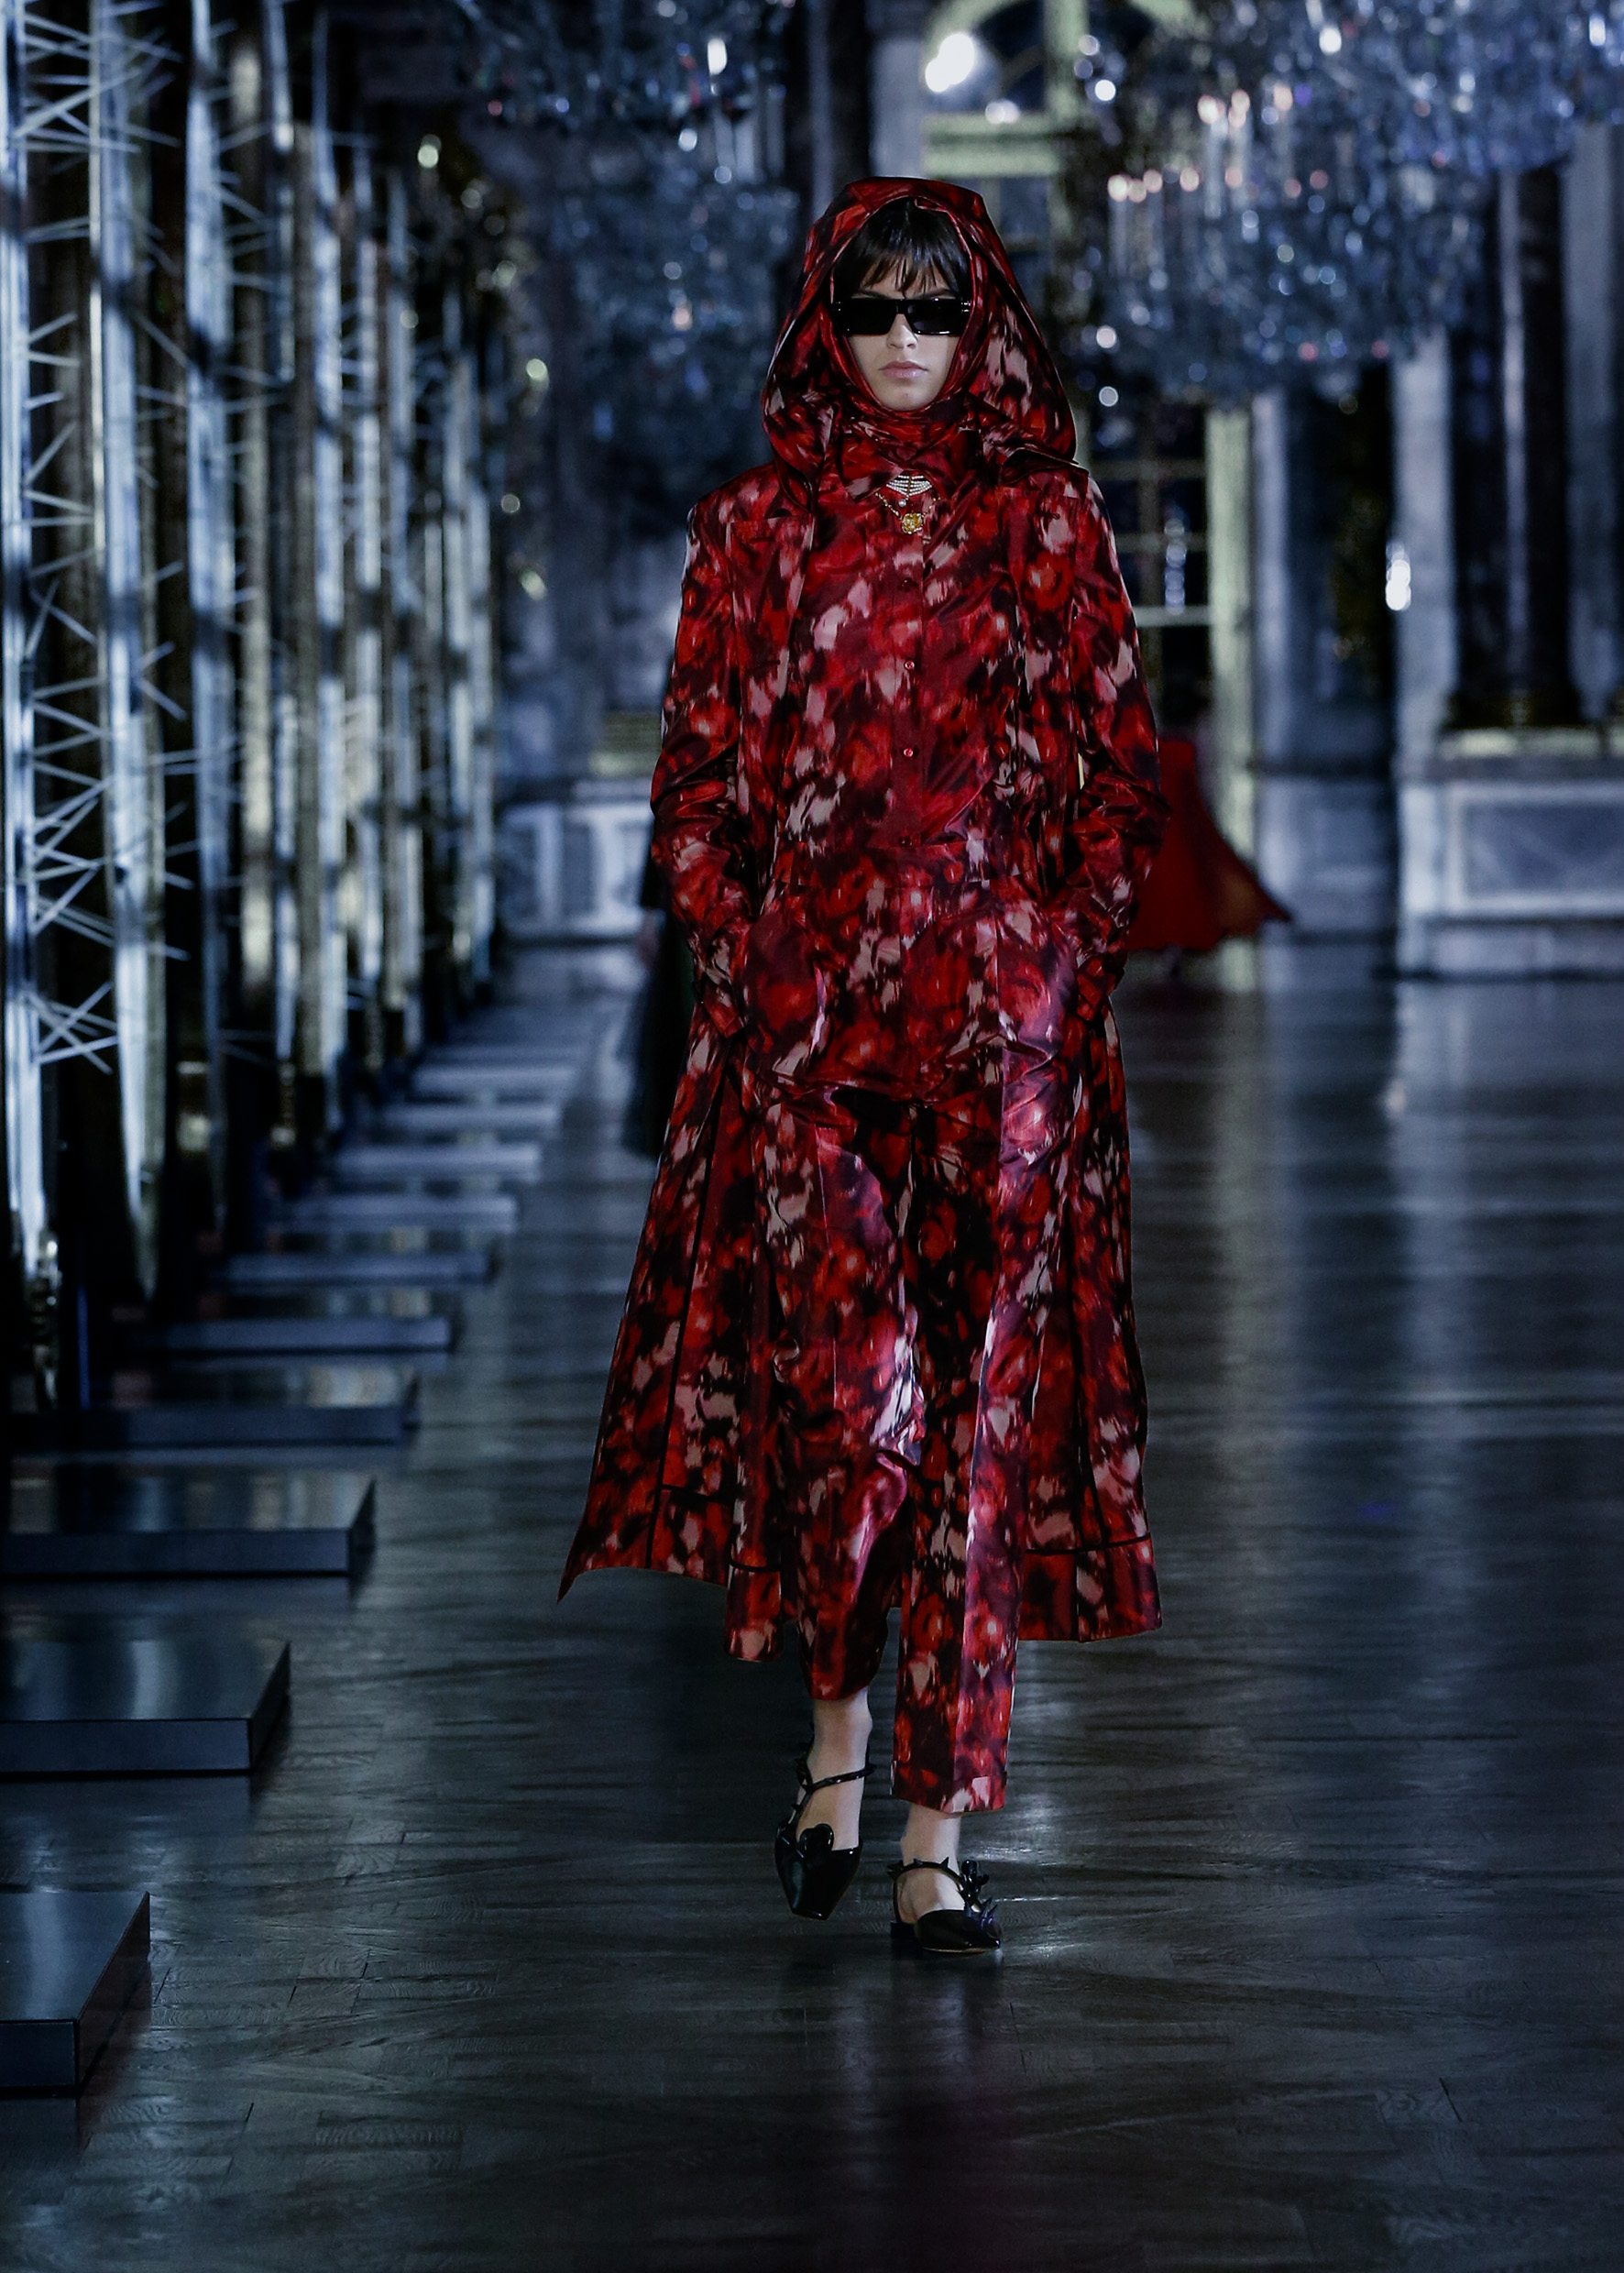 3 things to remember from the fall-winter 2021-2022 Dior show at the Château de Versailles